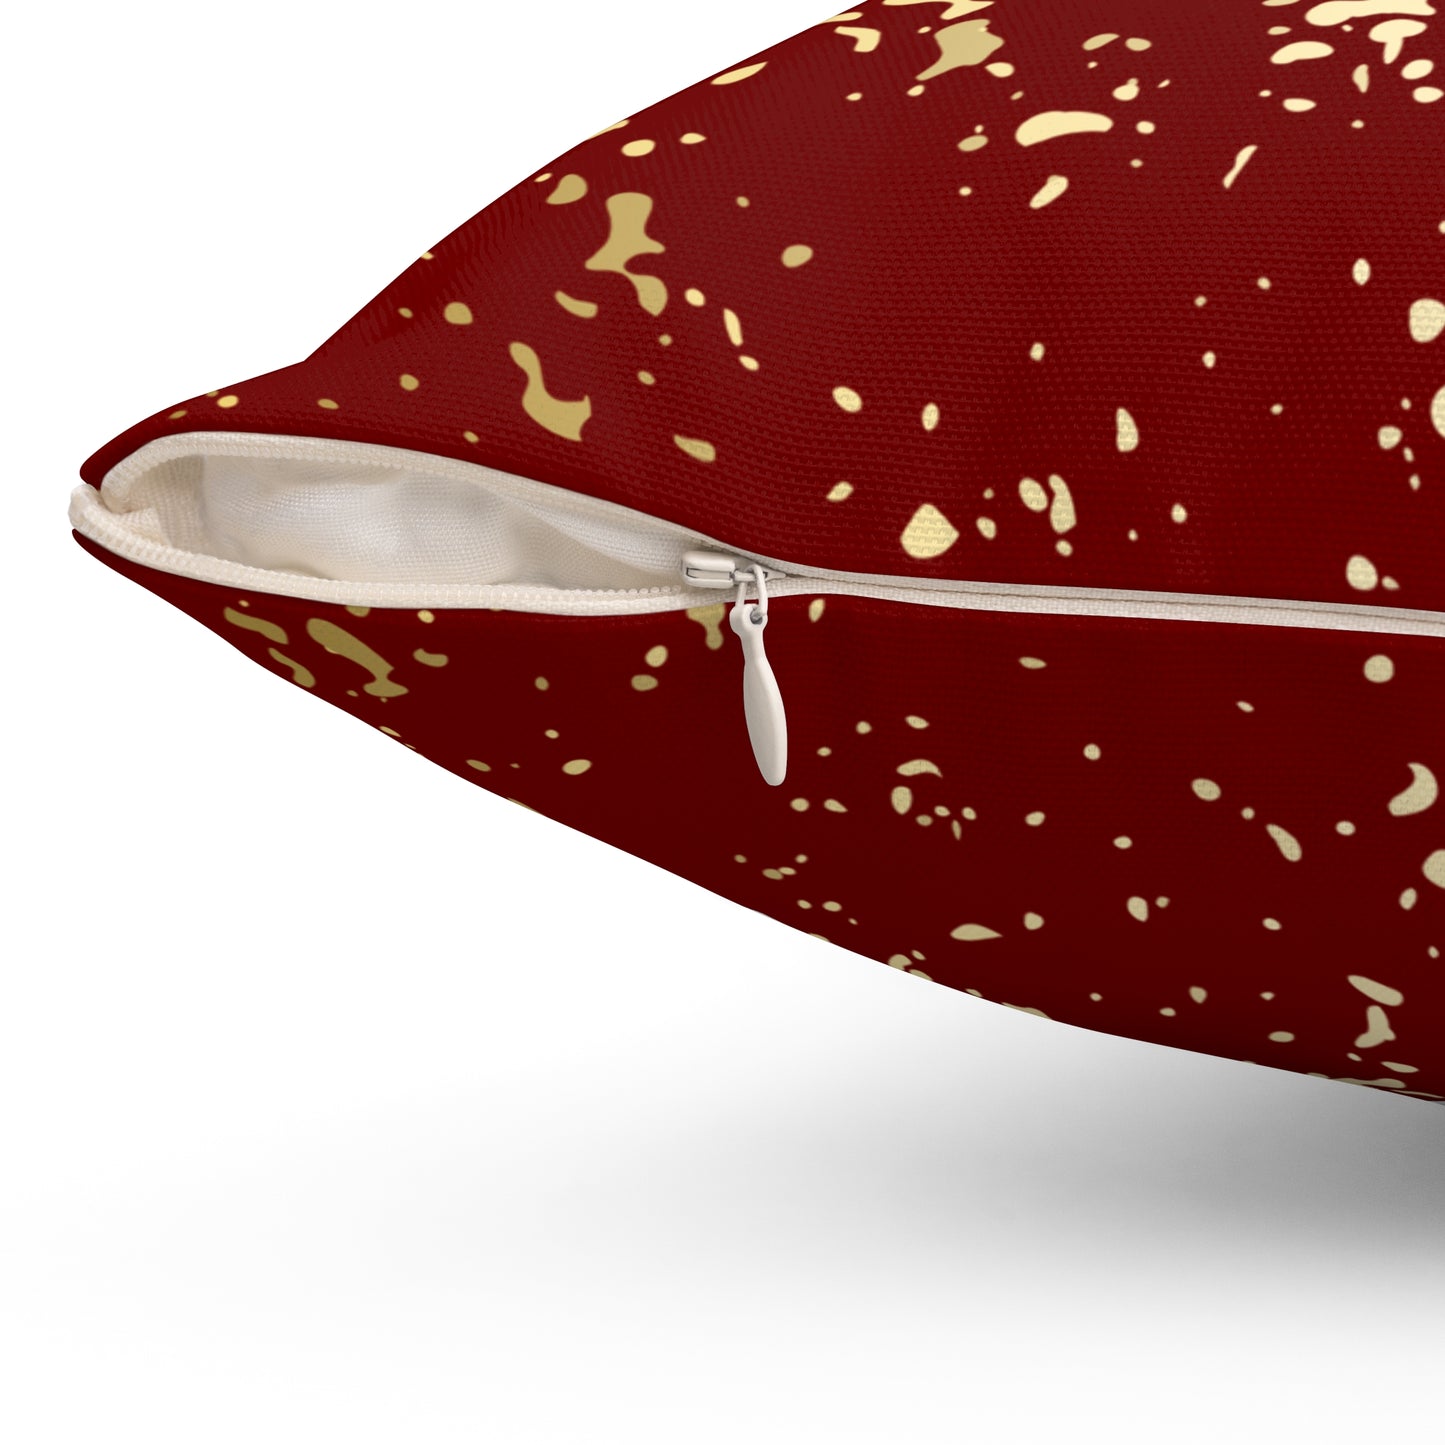 Maroon and Gold Flakes Throw Pillow